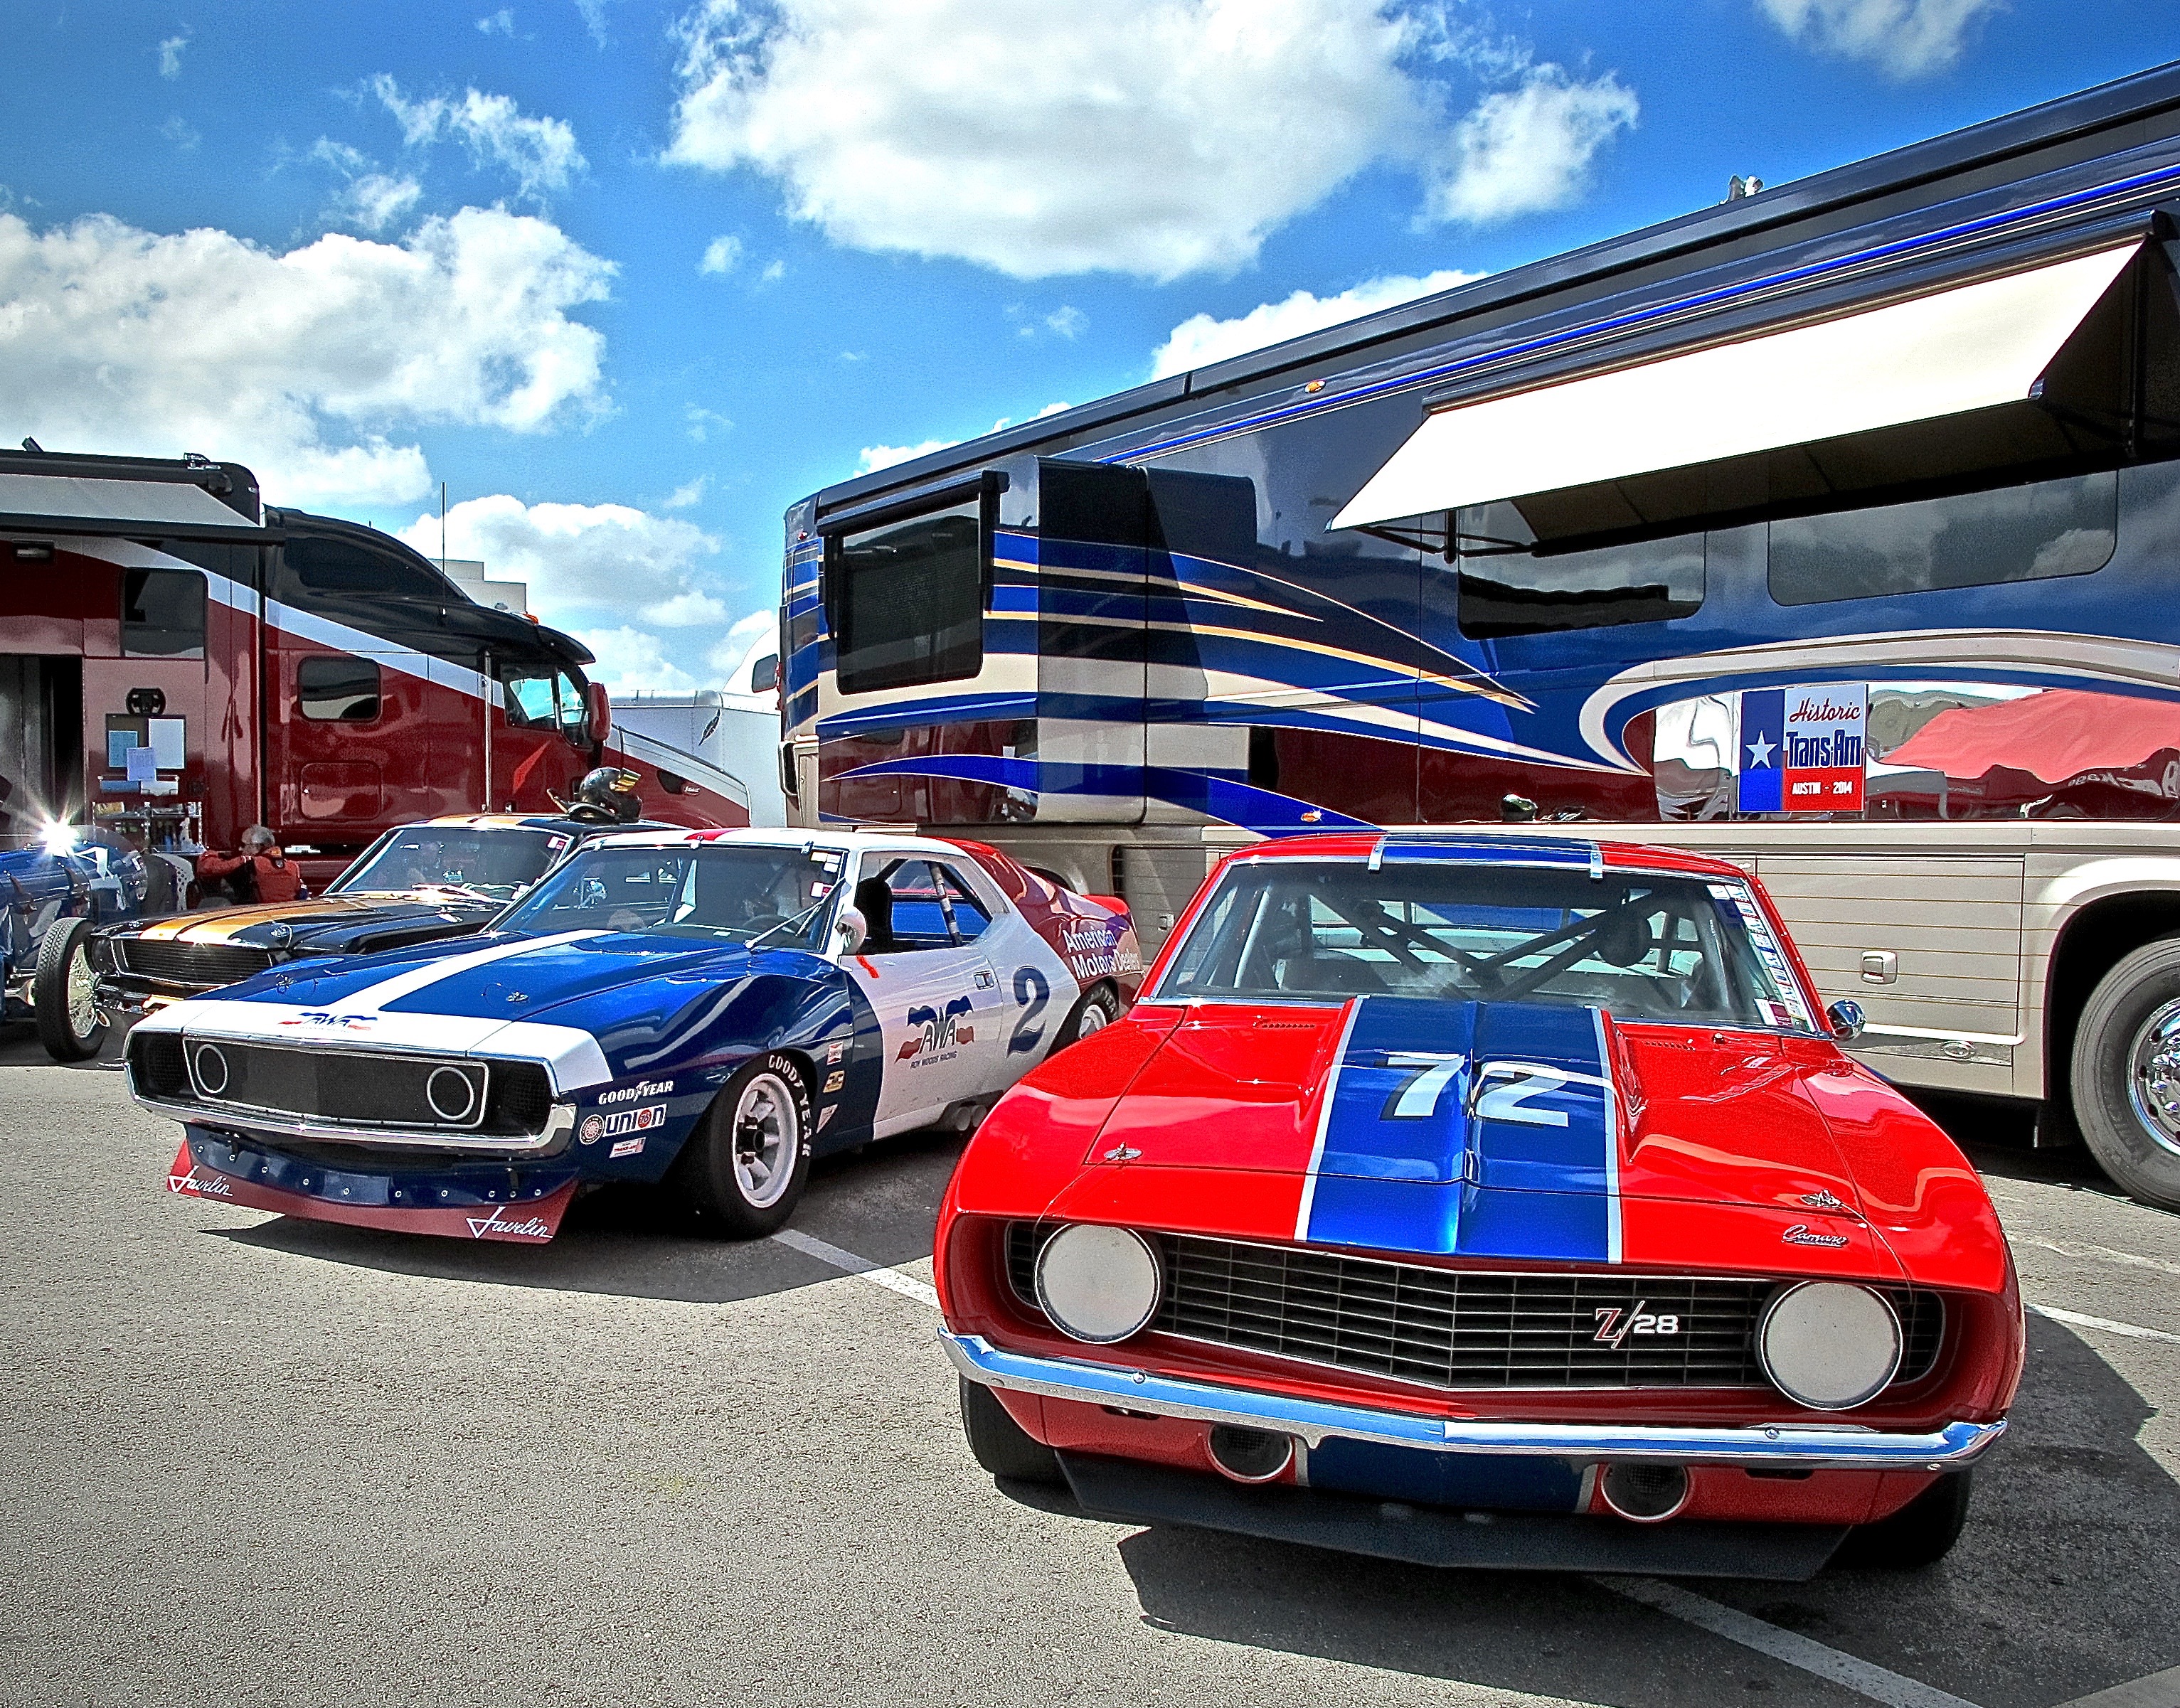 Pony race cars at Corinthian Races in College Station